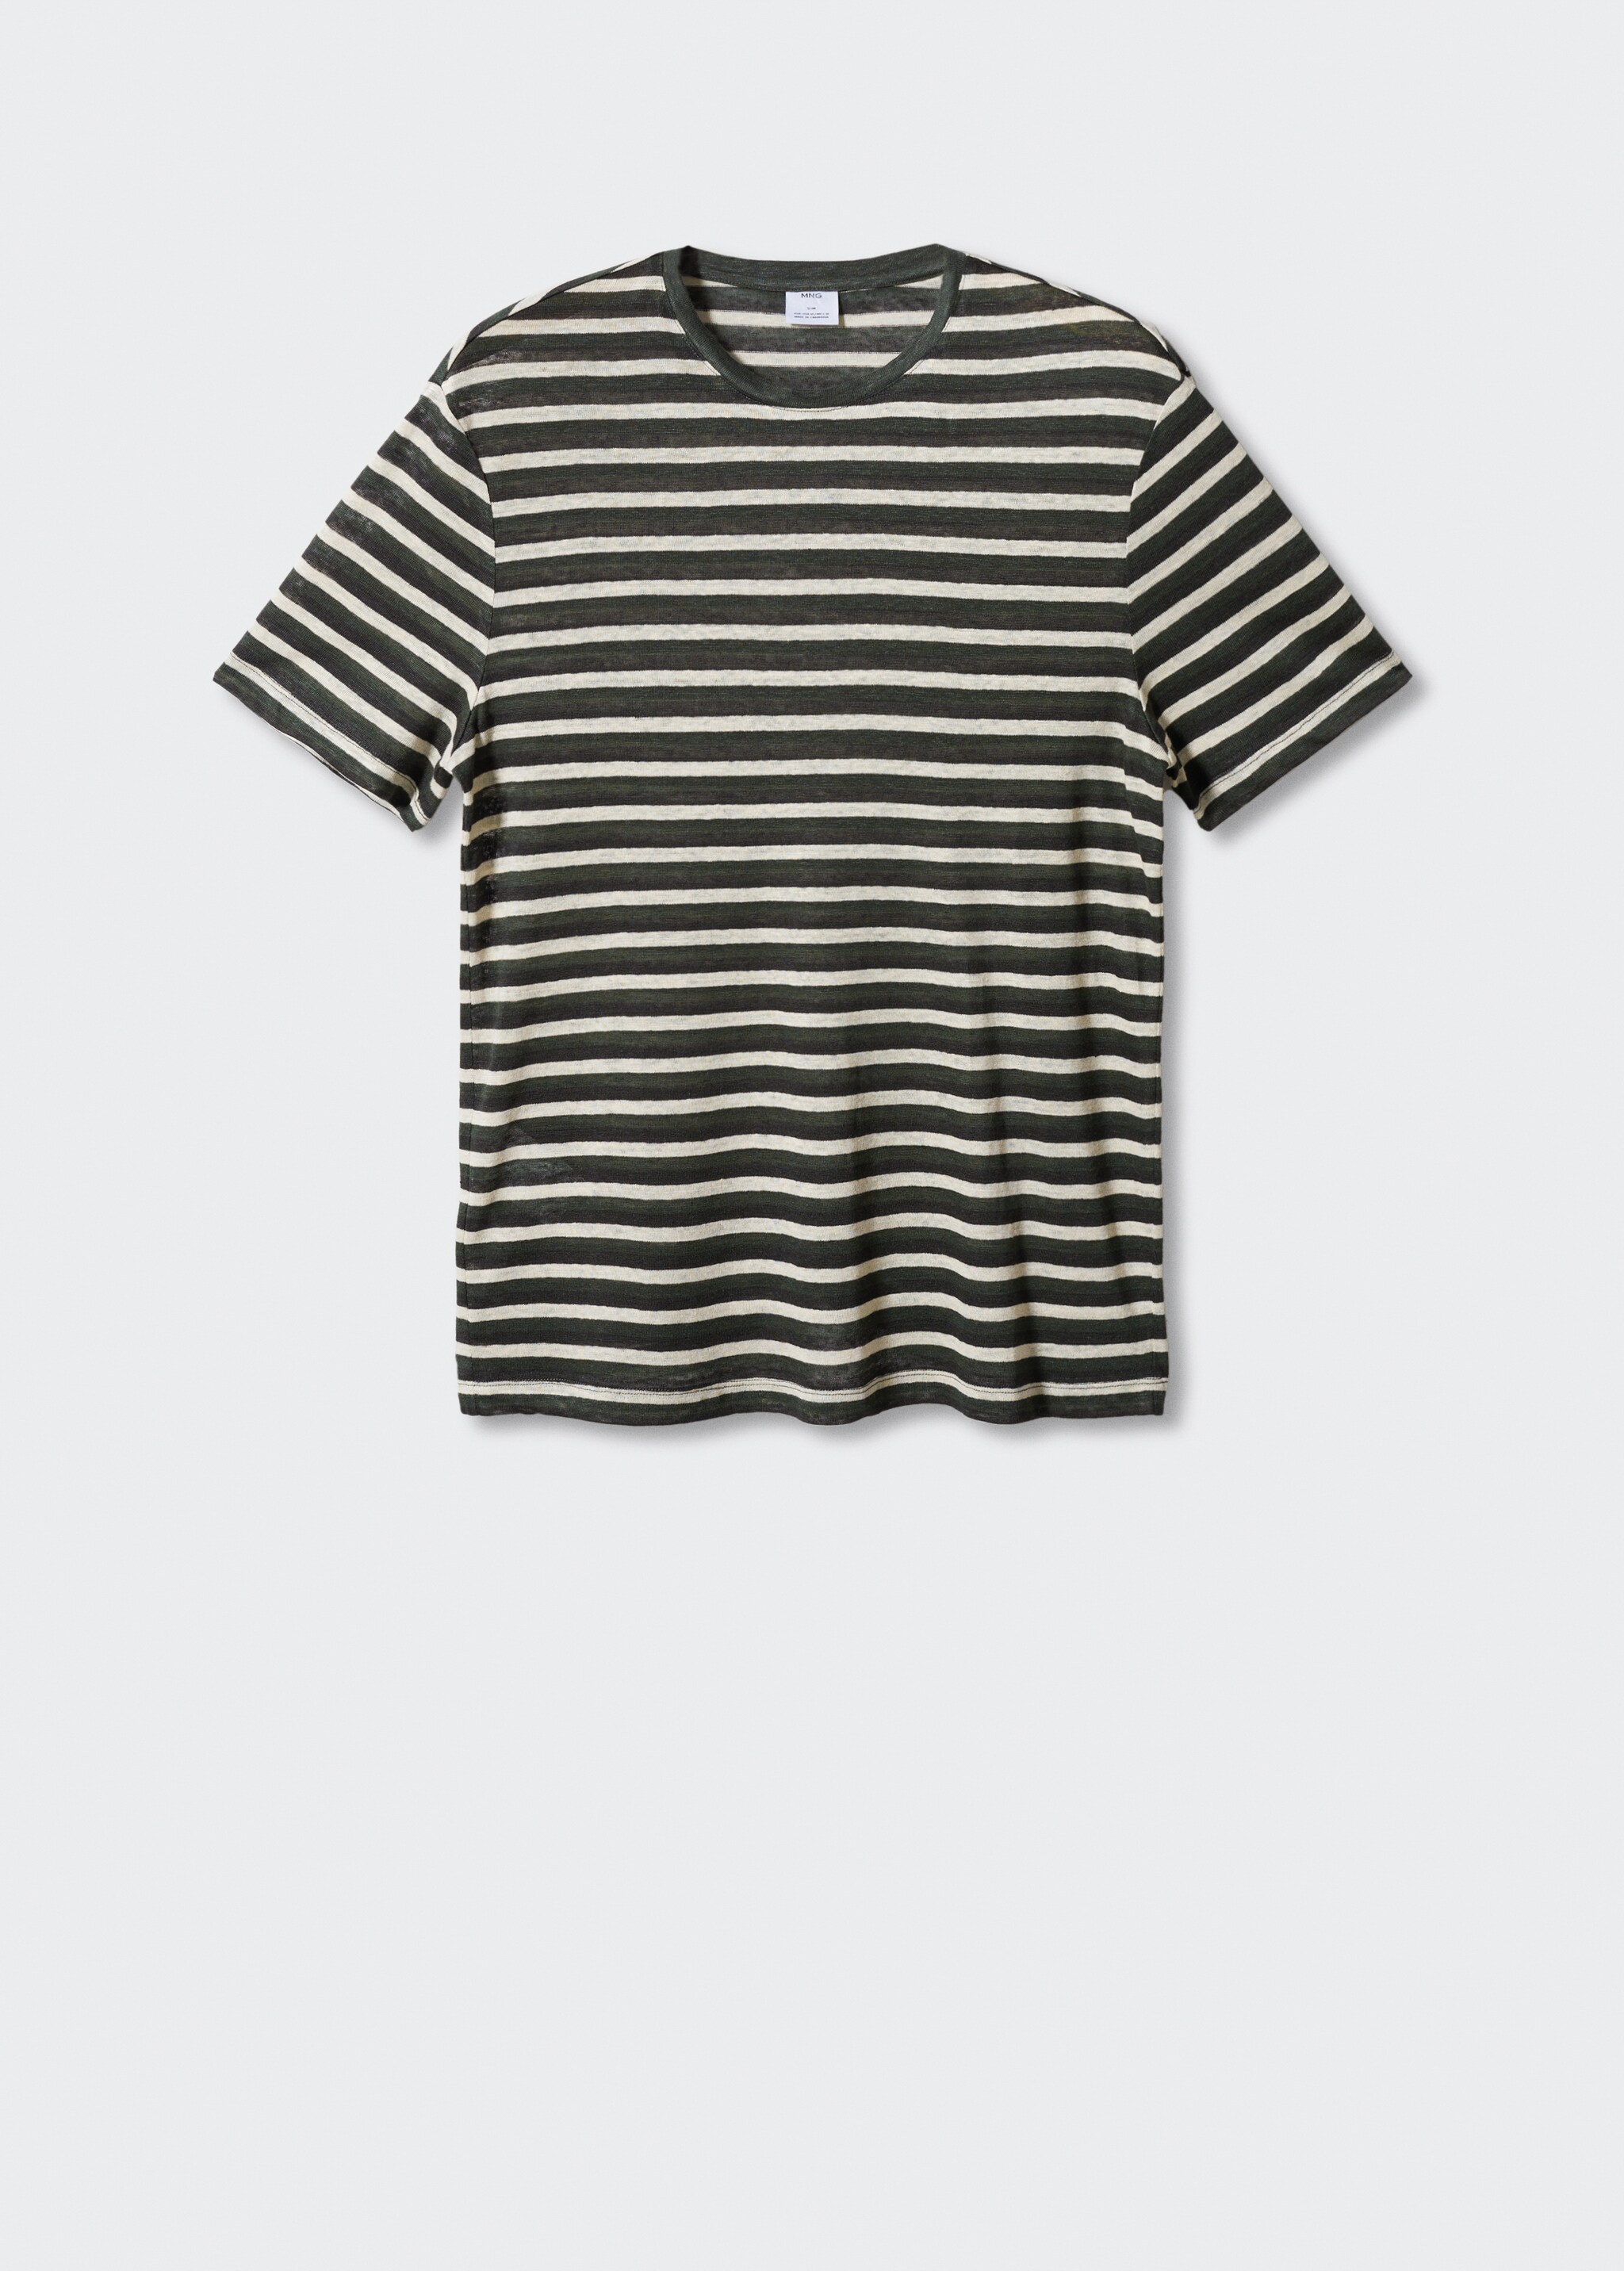 100% linen striped t-shirt - Article without model